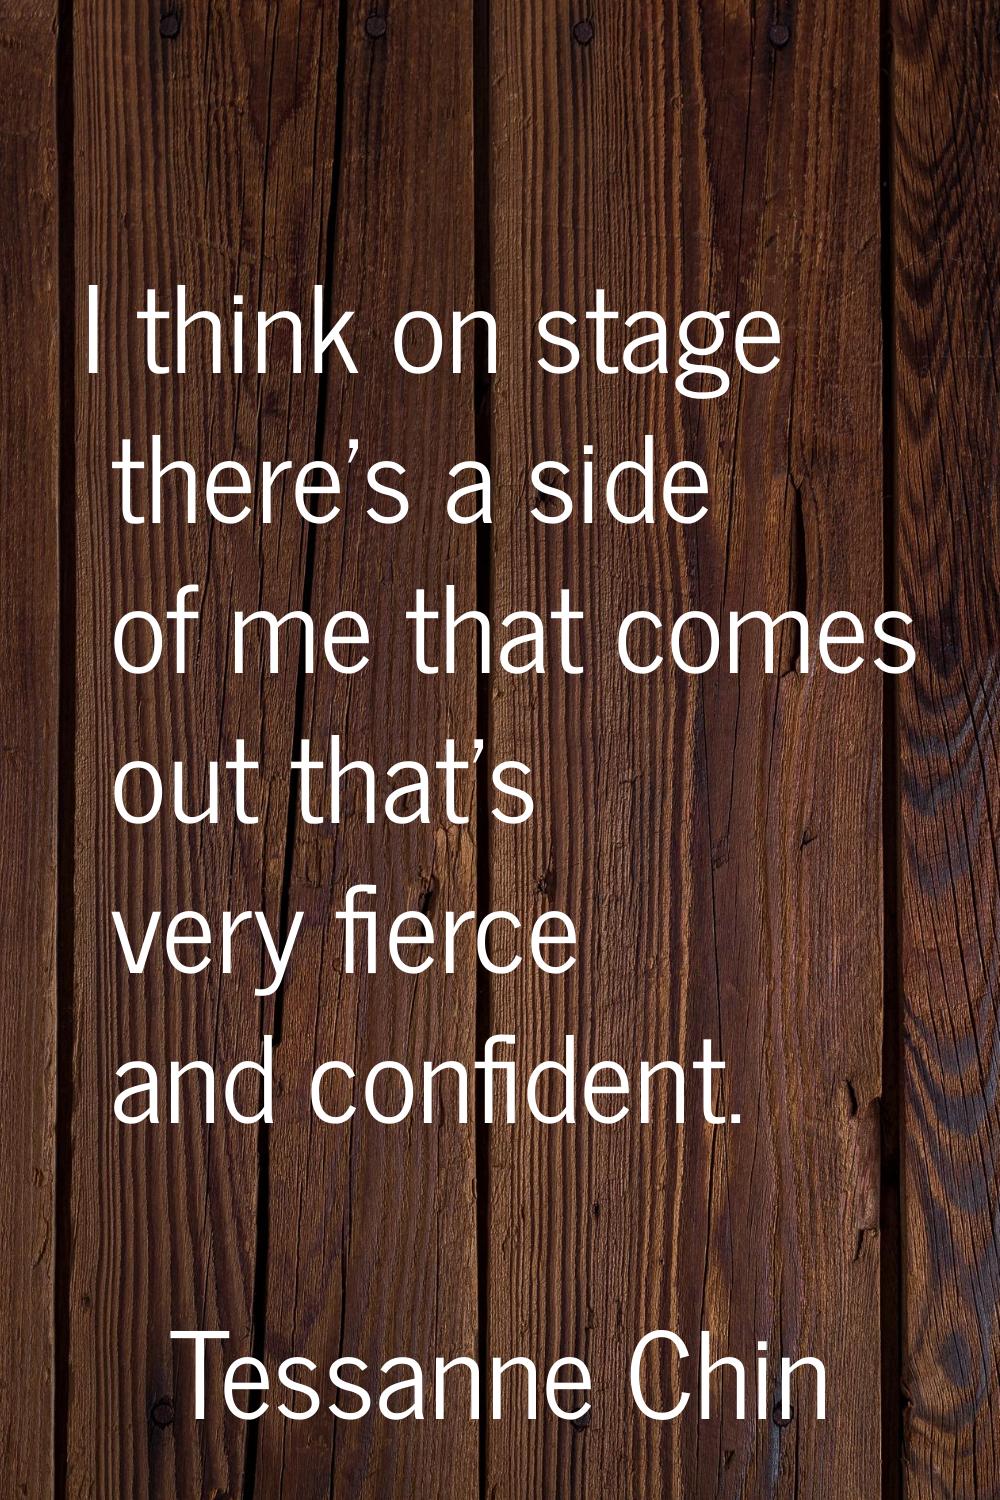 I think on stage there's a side of me that comes out that's very fierce and confident.